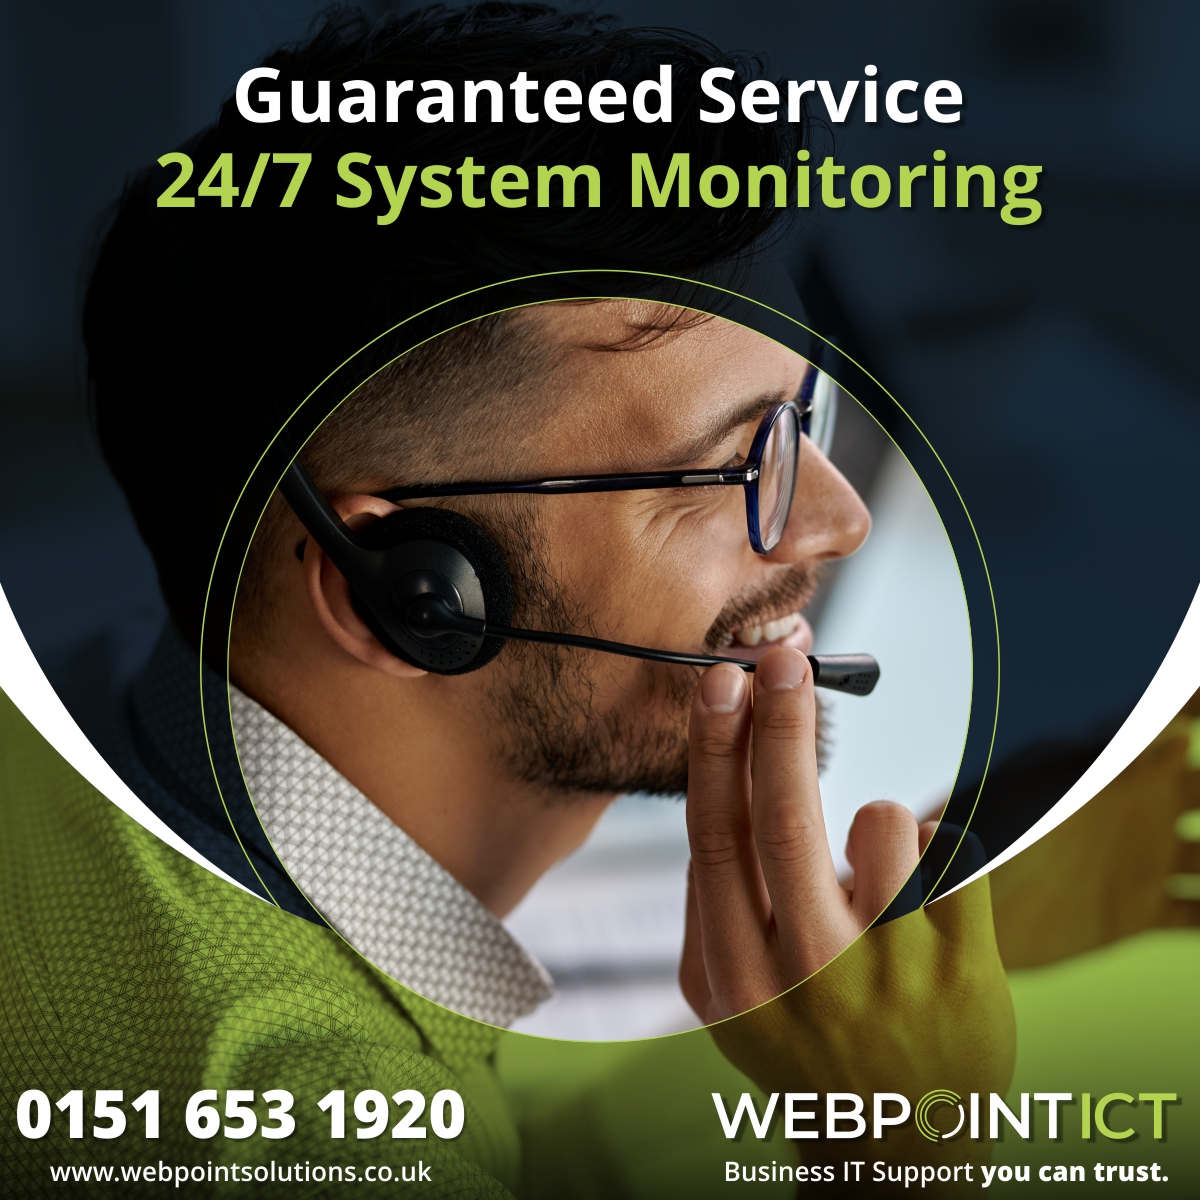 (2/3)
Our monthly service plans pay for themselves by guaranteeing system uptime & the availability of resources to your staff.  

Email us at questions@webpointsolutions.co.uk
or call us on 0151 653 1920.

#itsupportliverpool #itsupportmanchester #itsupportspecialists